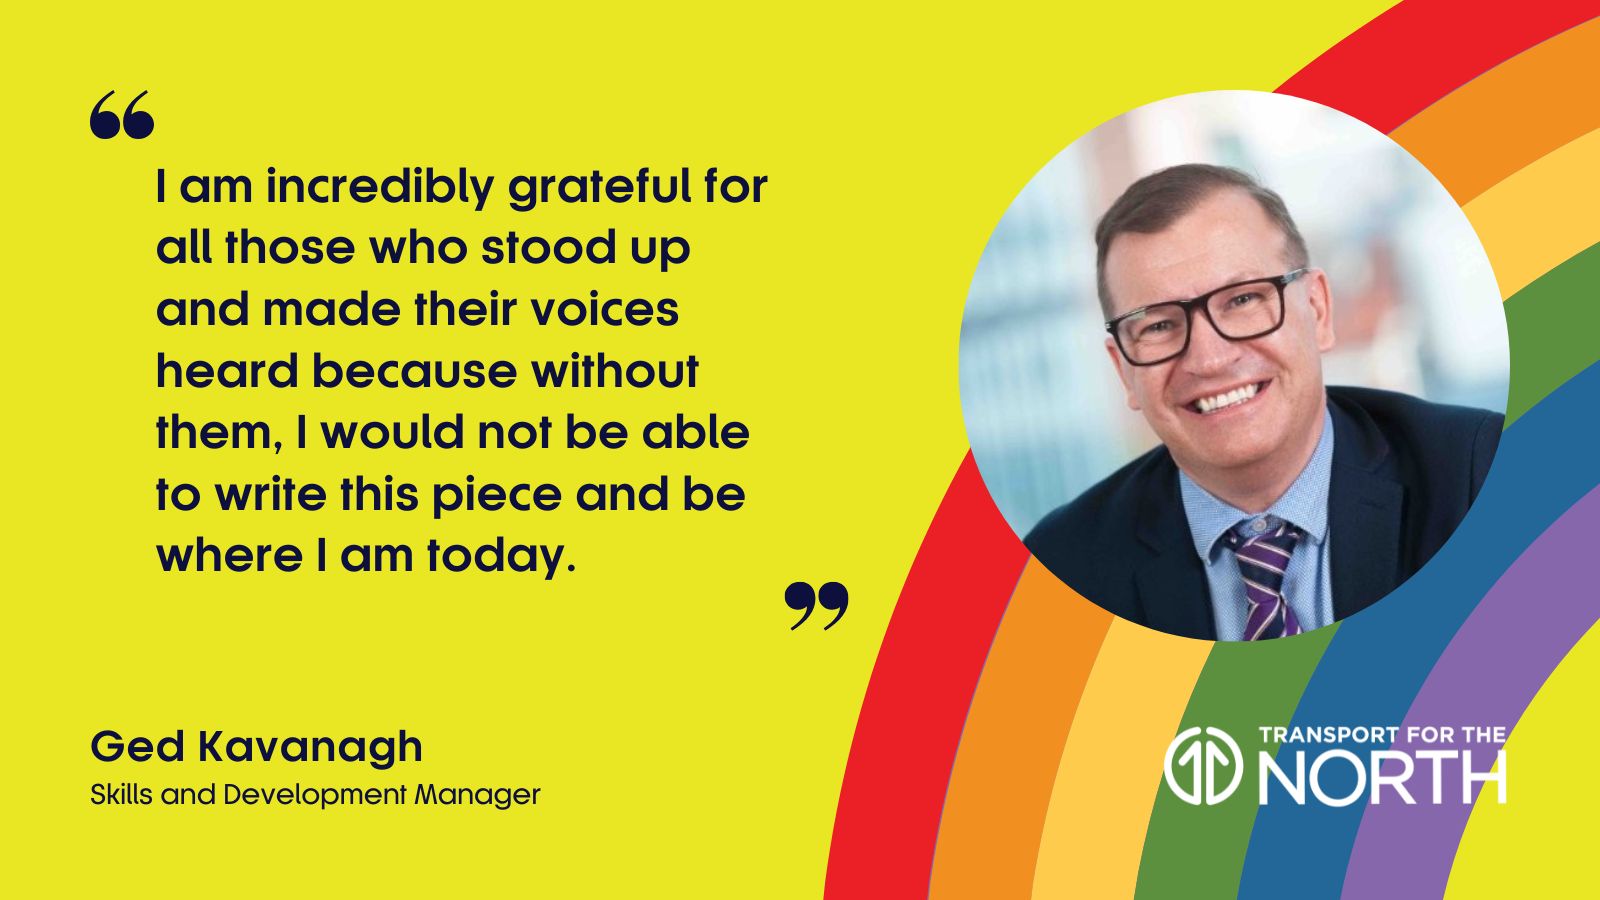 What Pride means to Ged Kavanagh, skills and development manager at Transport for the North